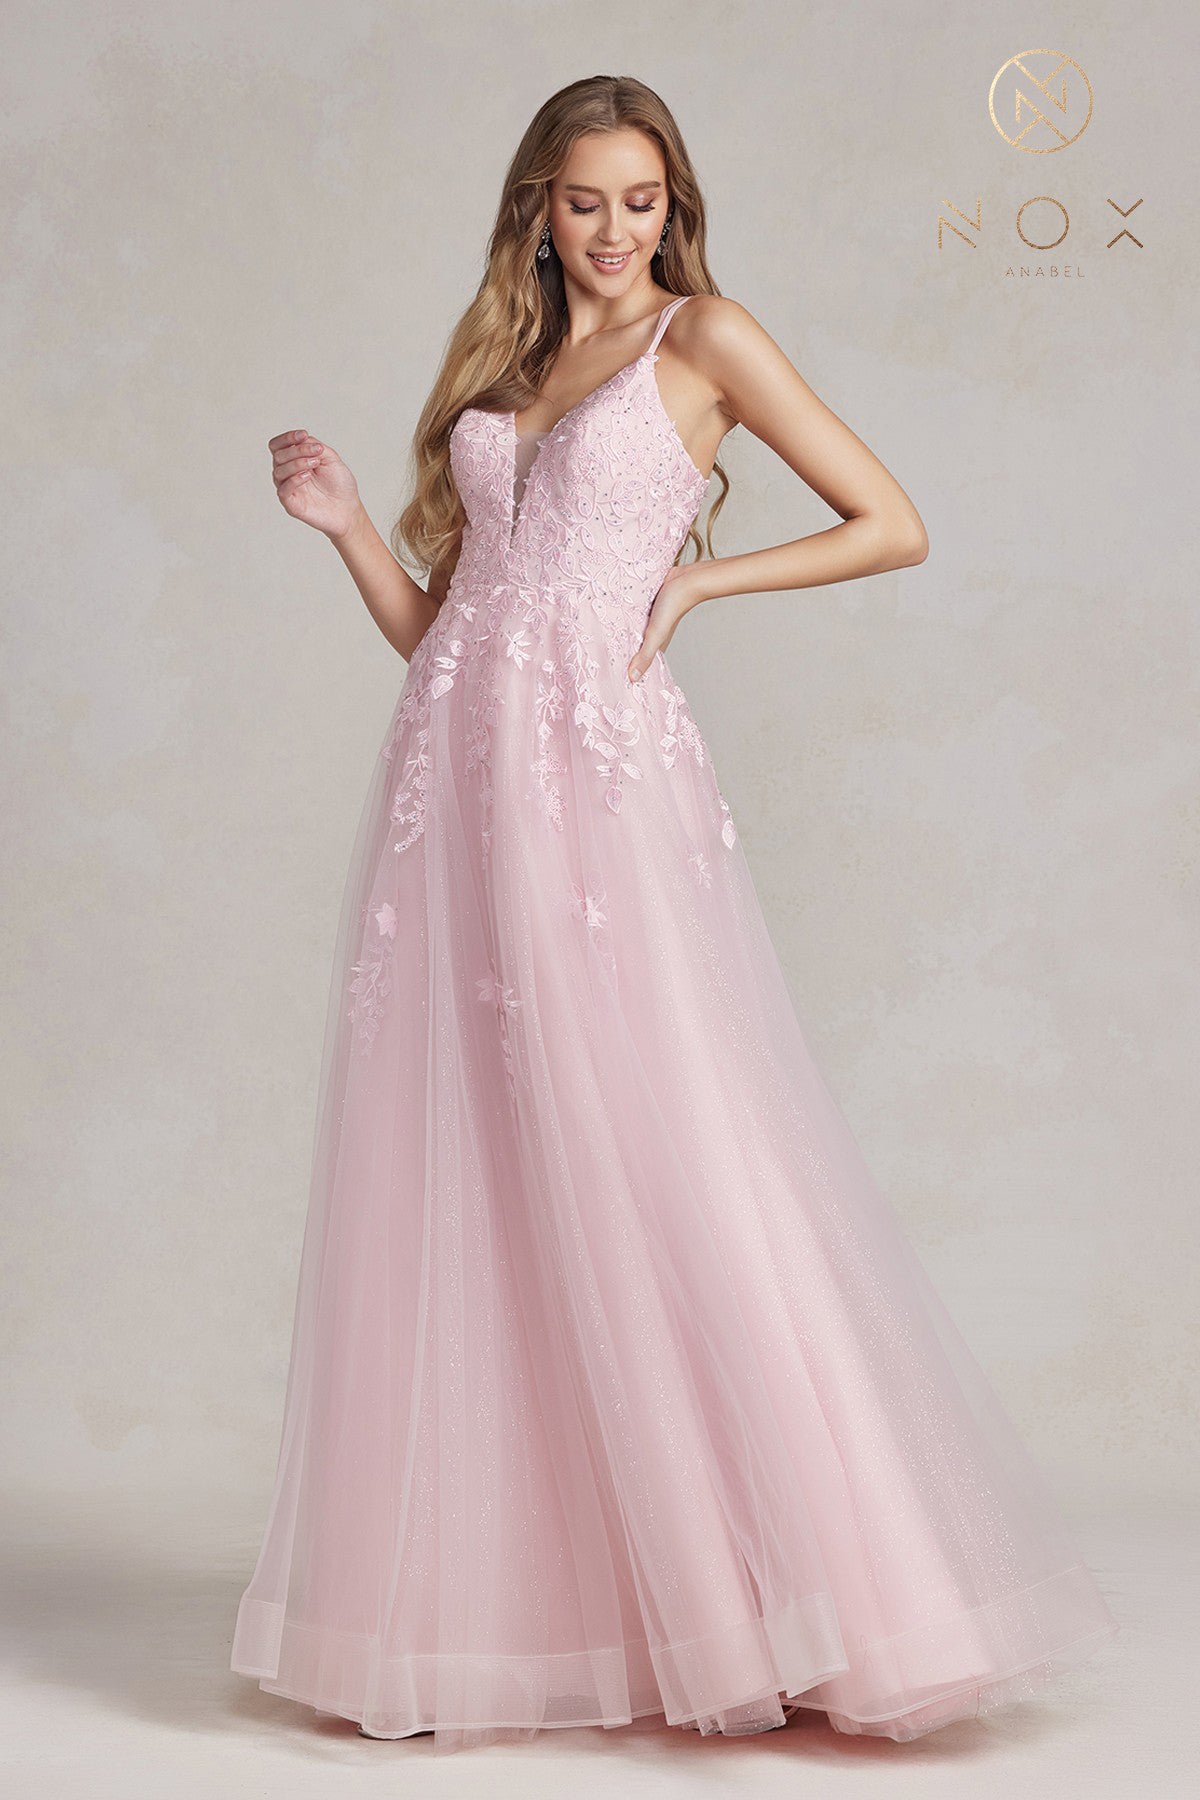 Tulle A-Line Gown By Nox Anabel -T1136